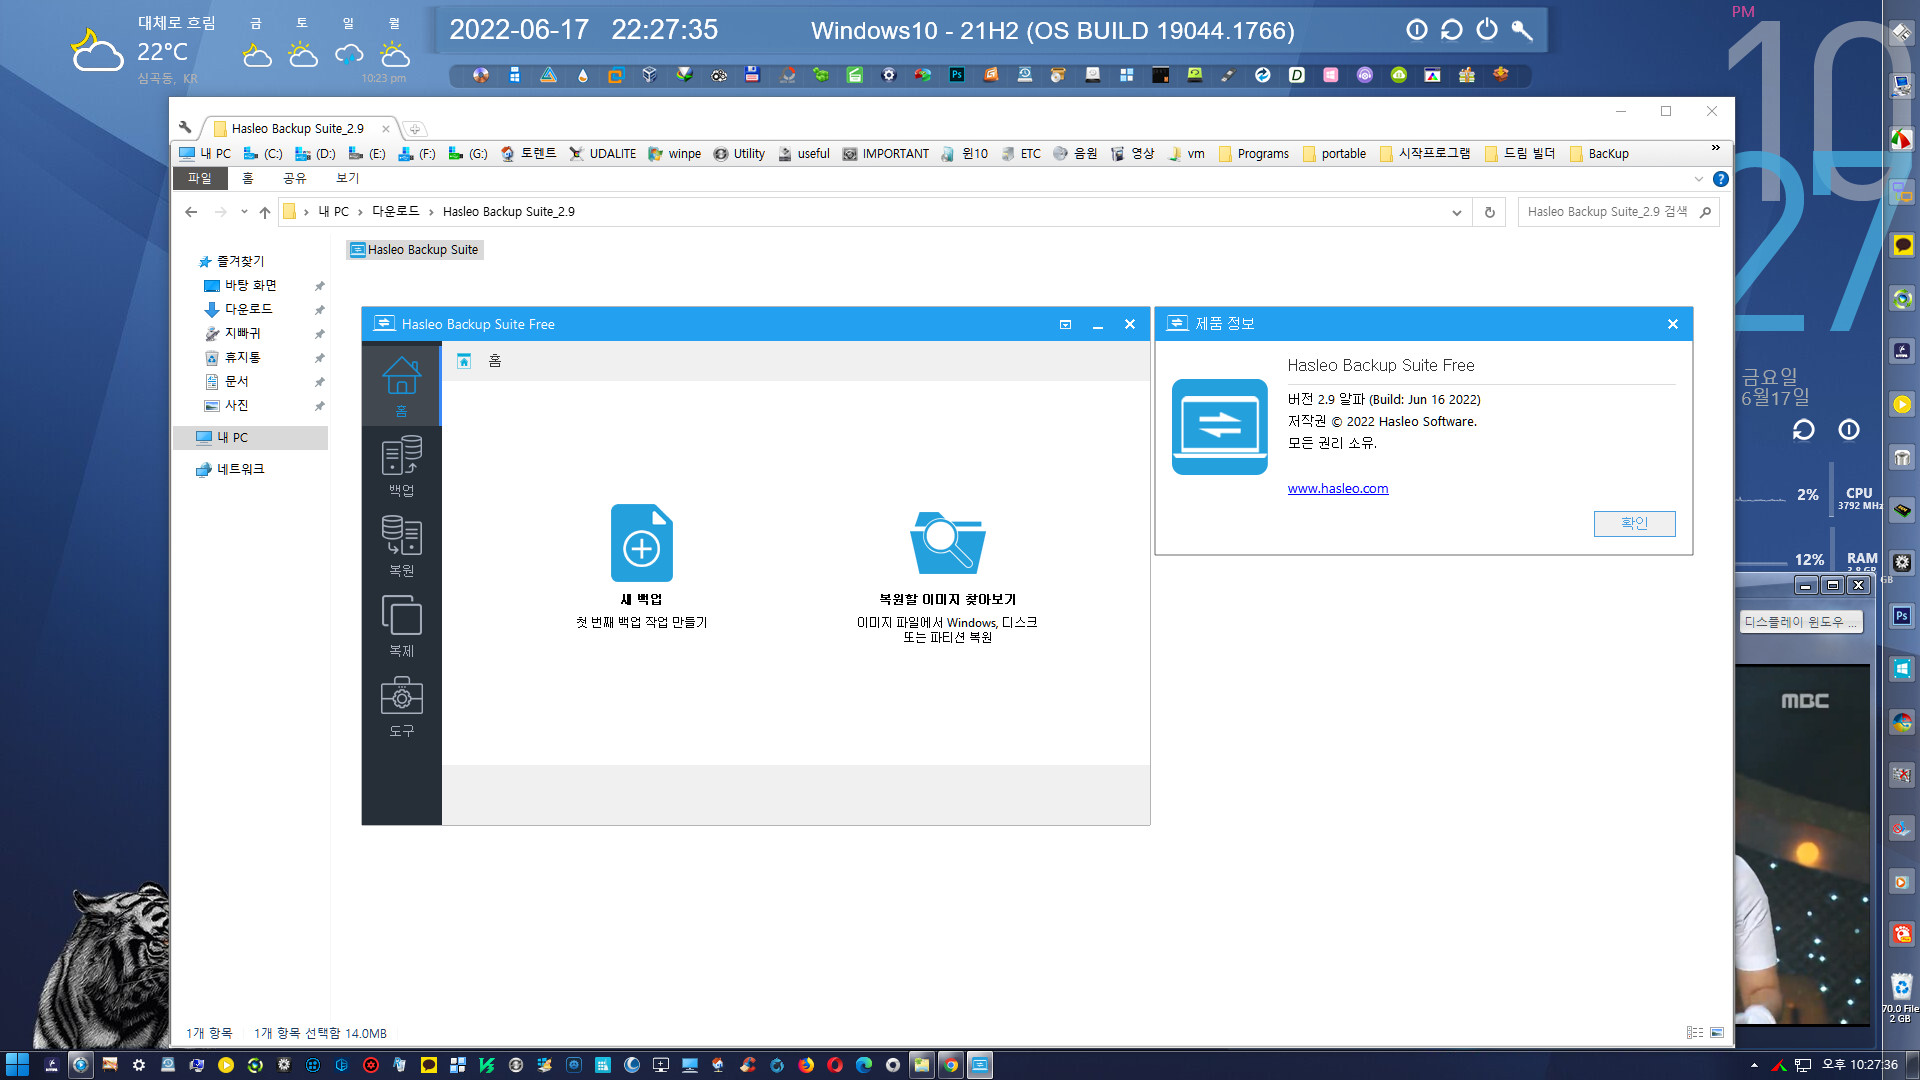 download the new Hasleo Backup Suite 3.6